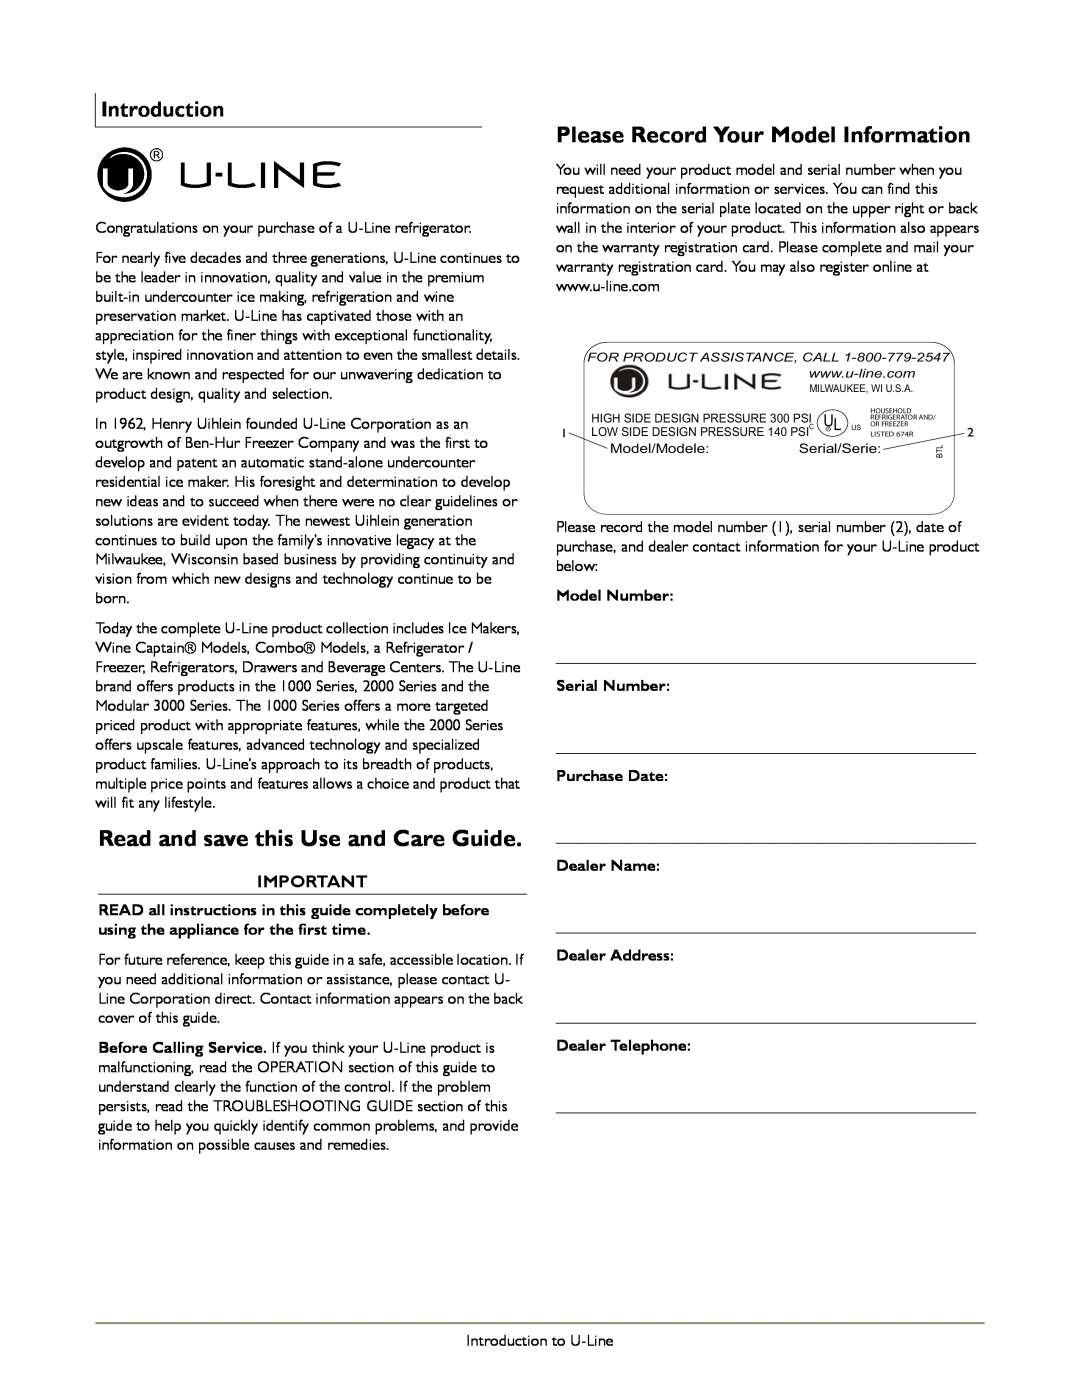 U-Line ULN-29RB-00 Read and save this Use and Care Guide, Please Record Your Model Information, Introduction, Model Number 